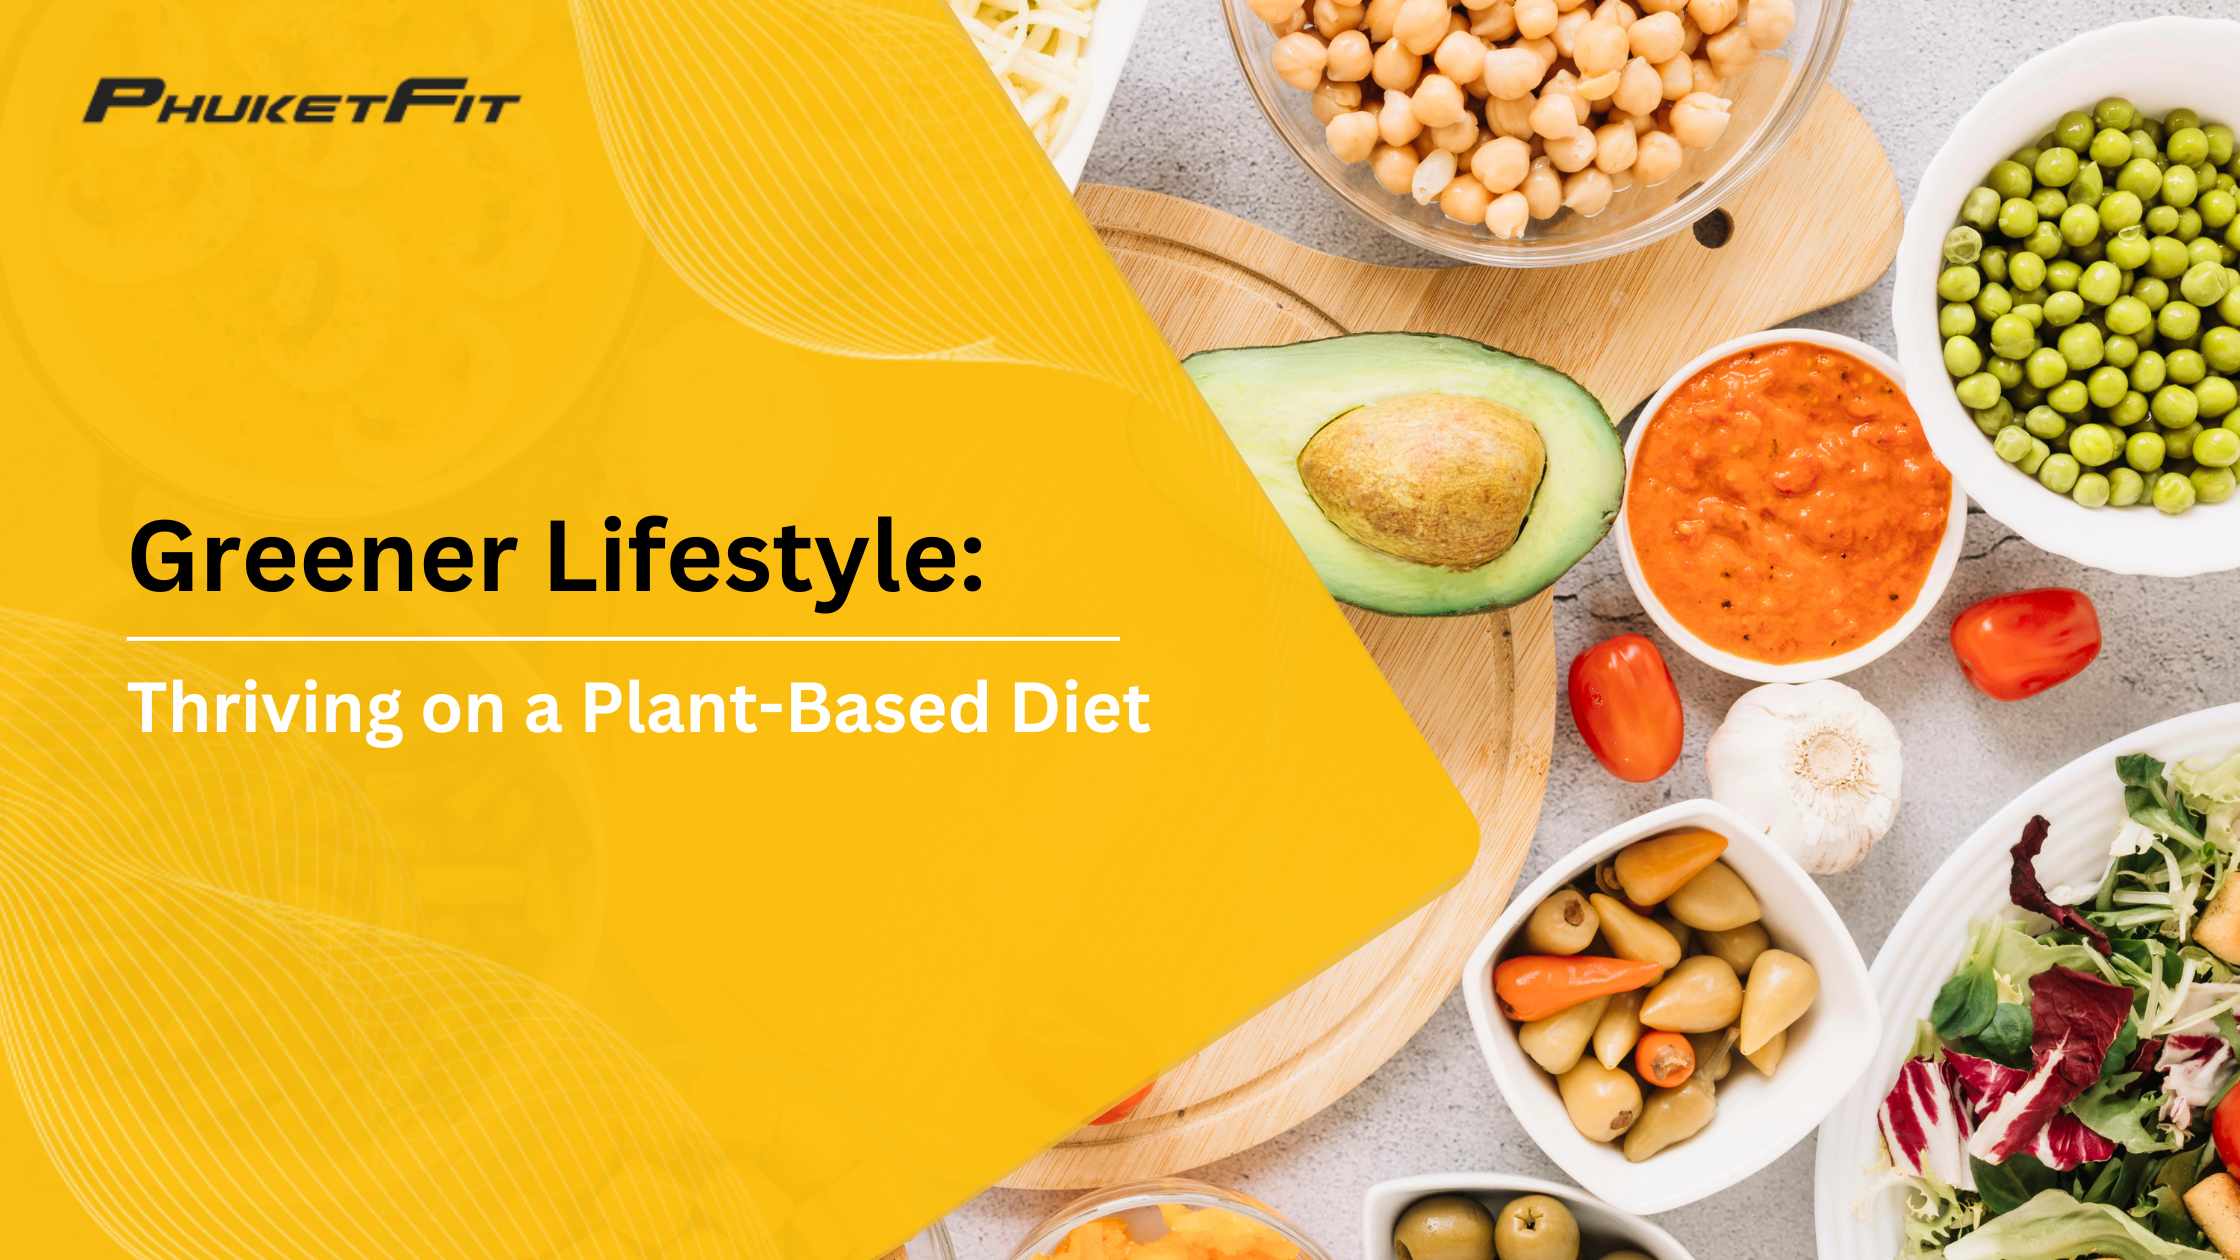 Thriving on a Plant Based Diet, a greener lifestyle - PhuketFit Fitness and Weight Loss Resort